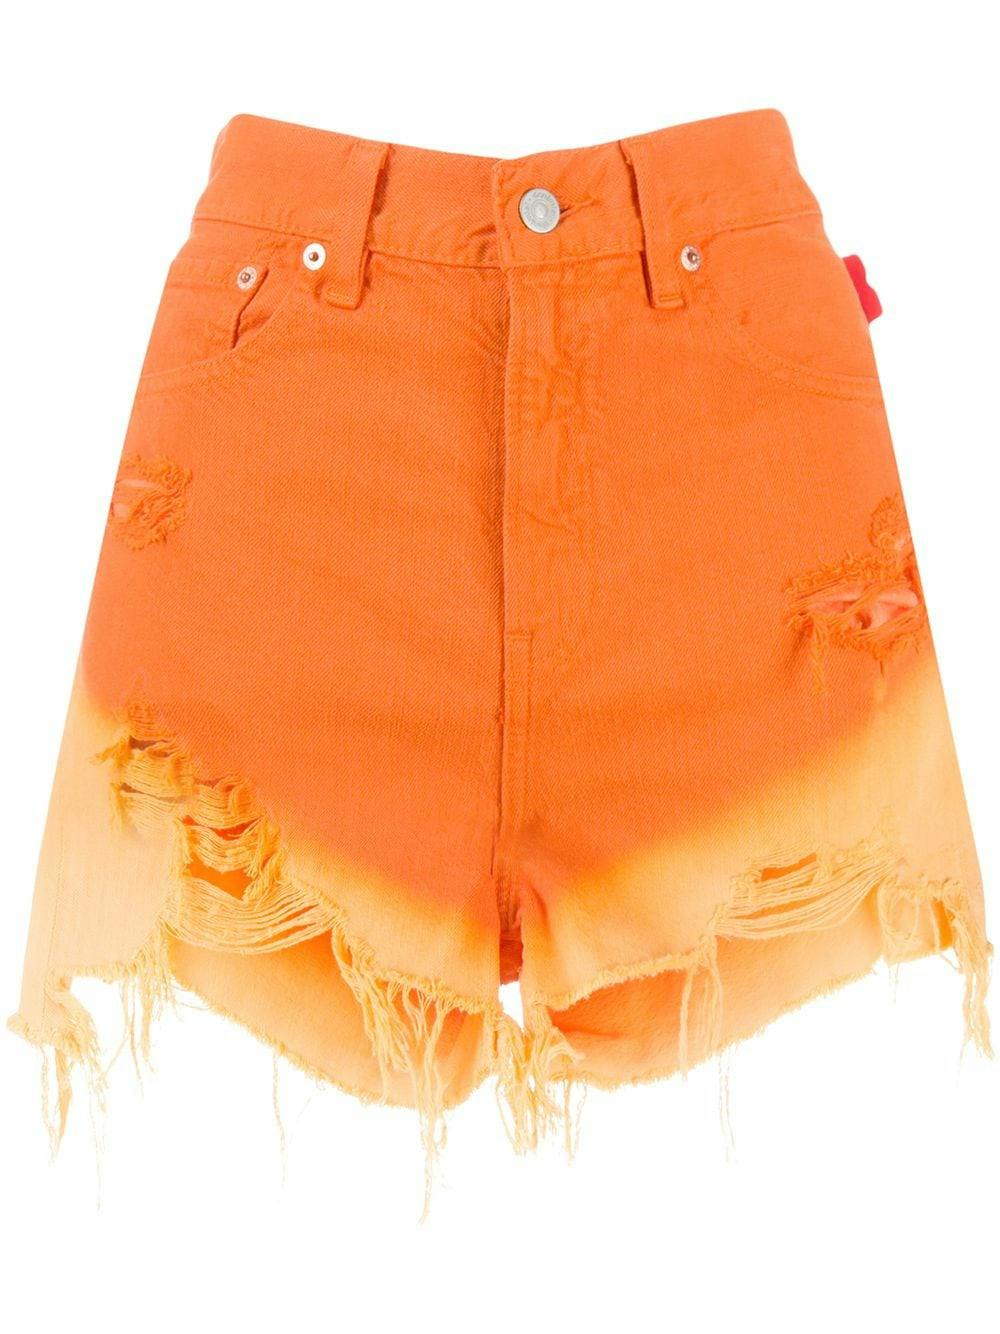 9 of the best women's shorts for summer